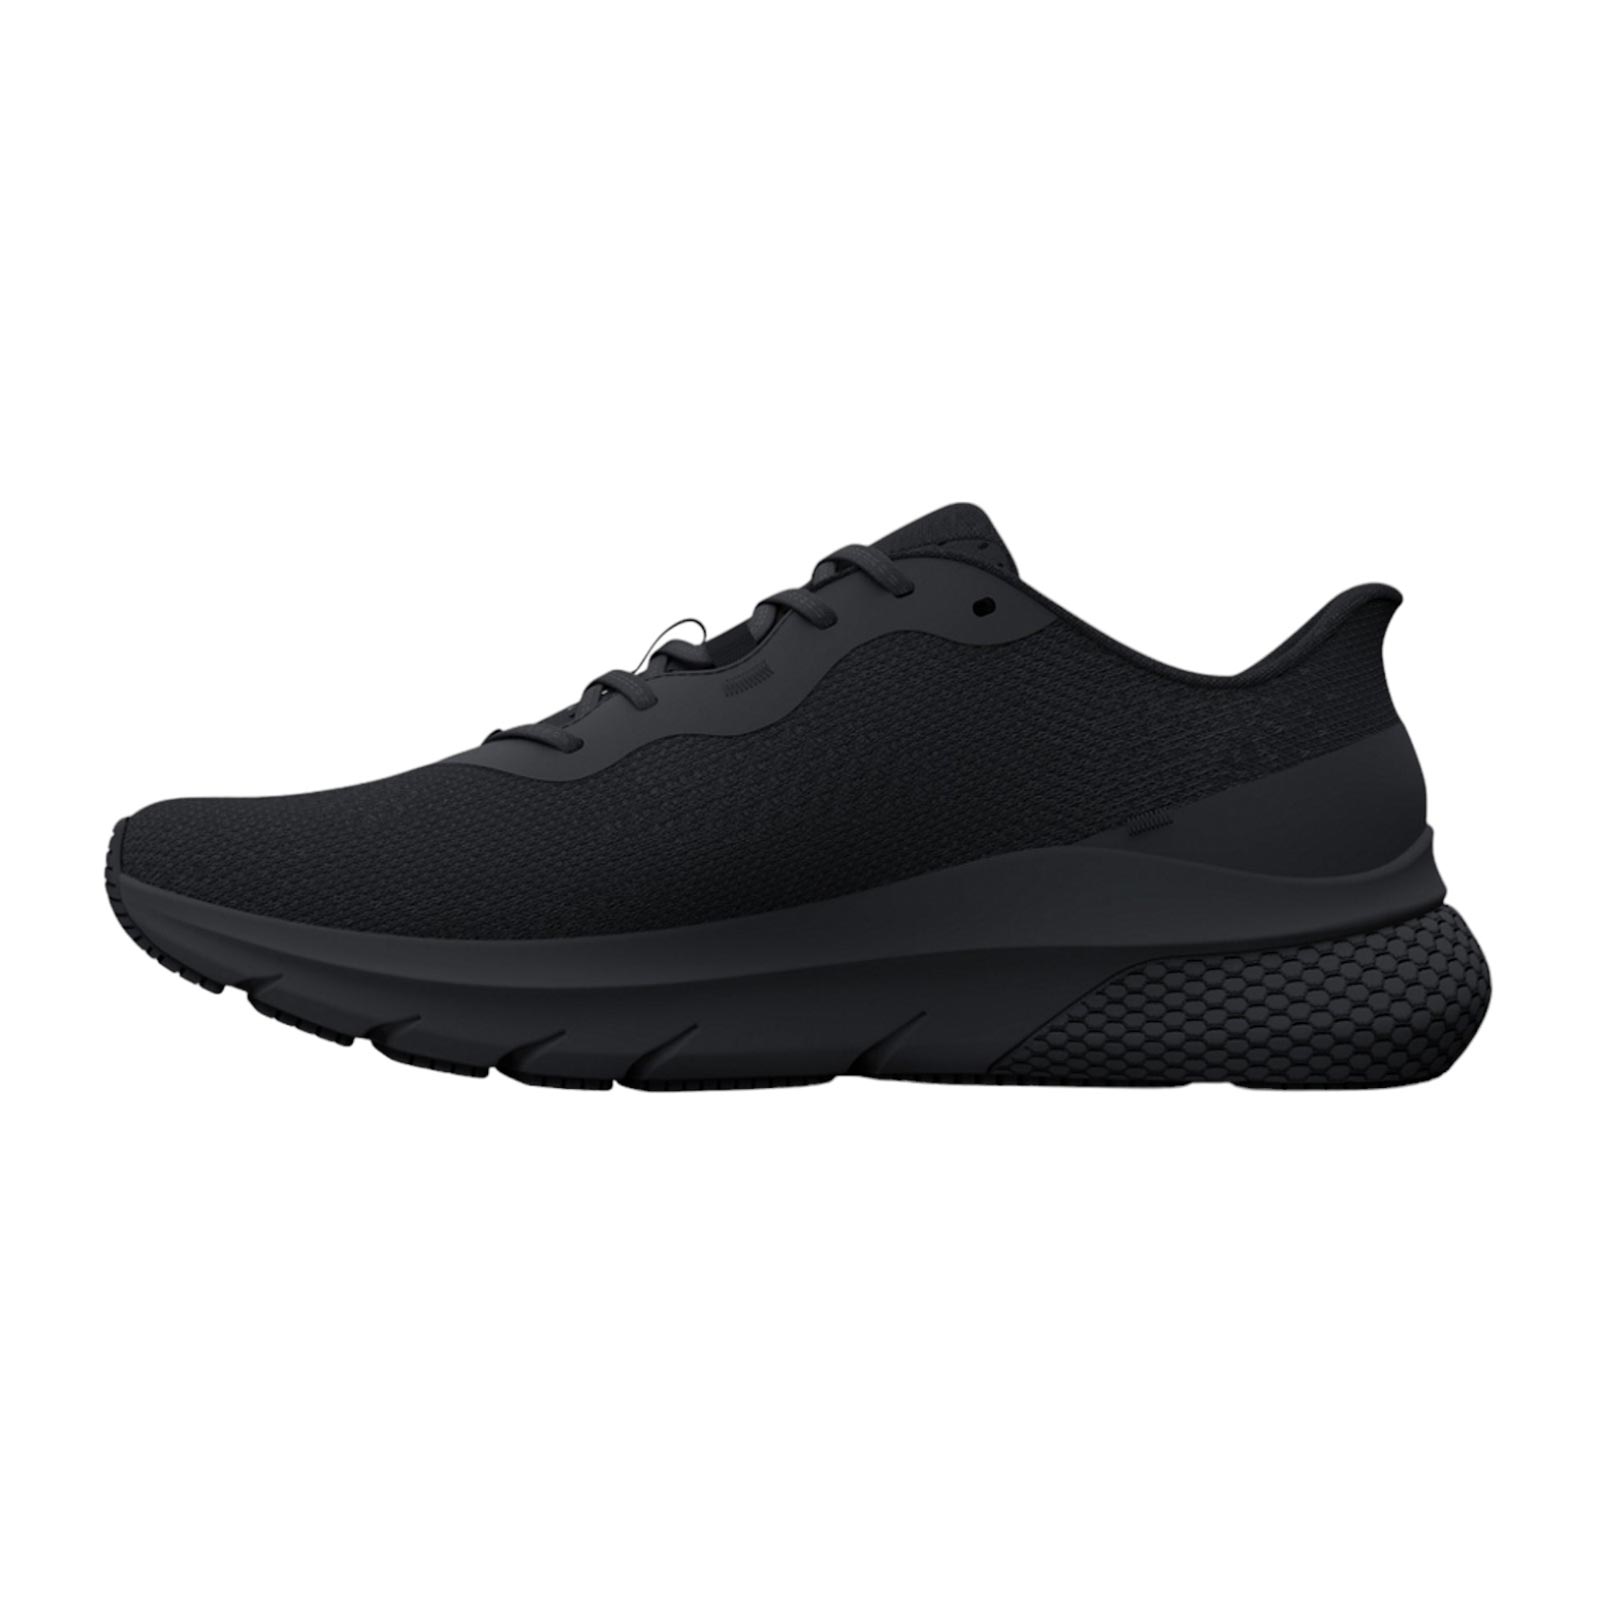 UNDER ARMOUR HOVR™ TURBULENCE 2 MENS RUNNING SHOES